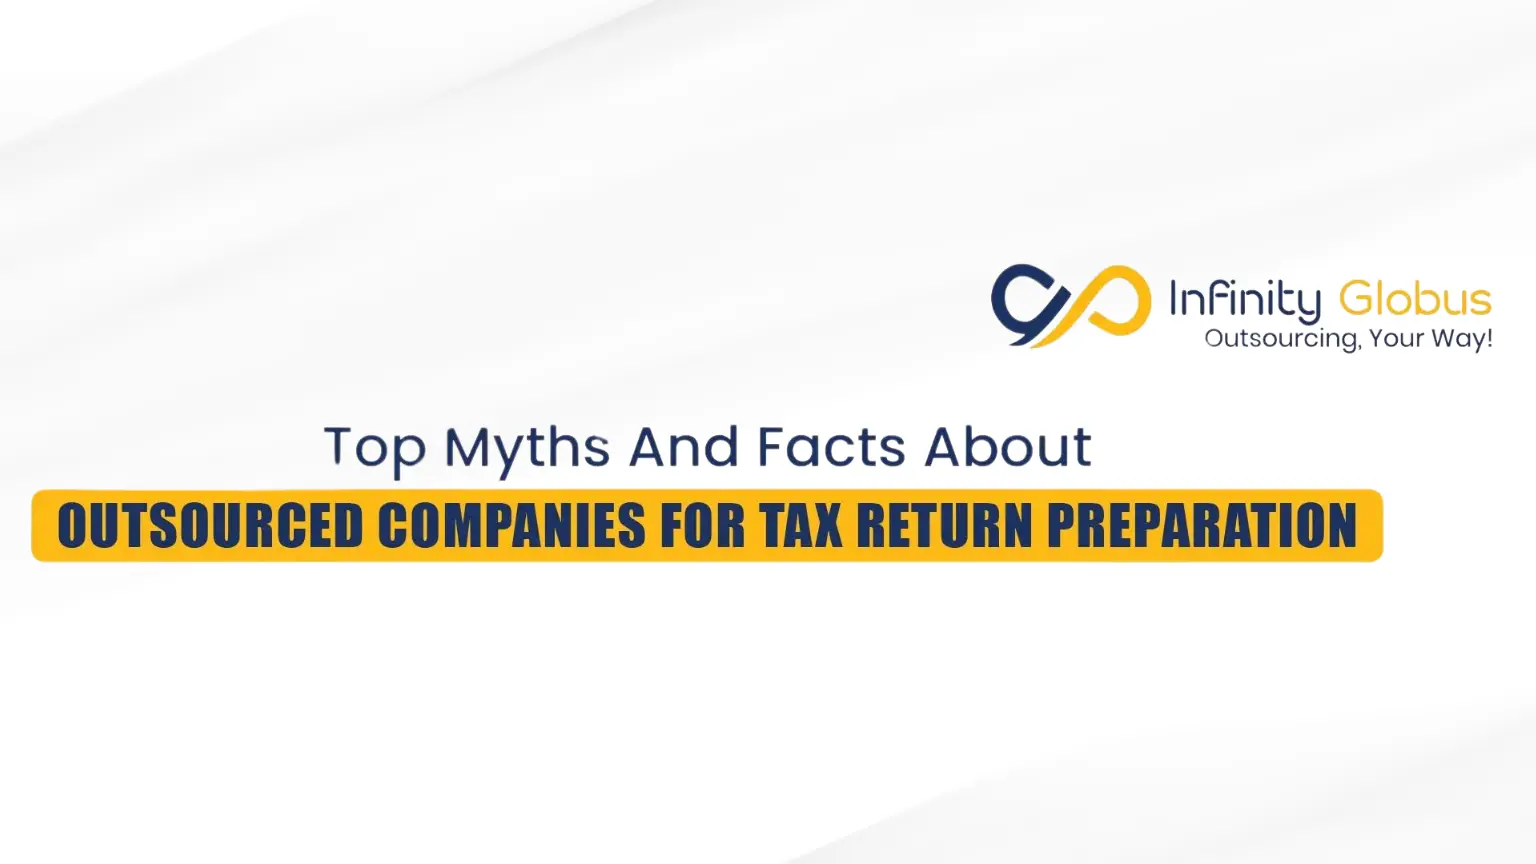 Top Myths And Facts About Outsourced Companies For Tax Return Preparation